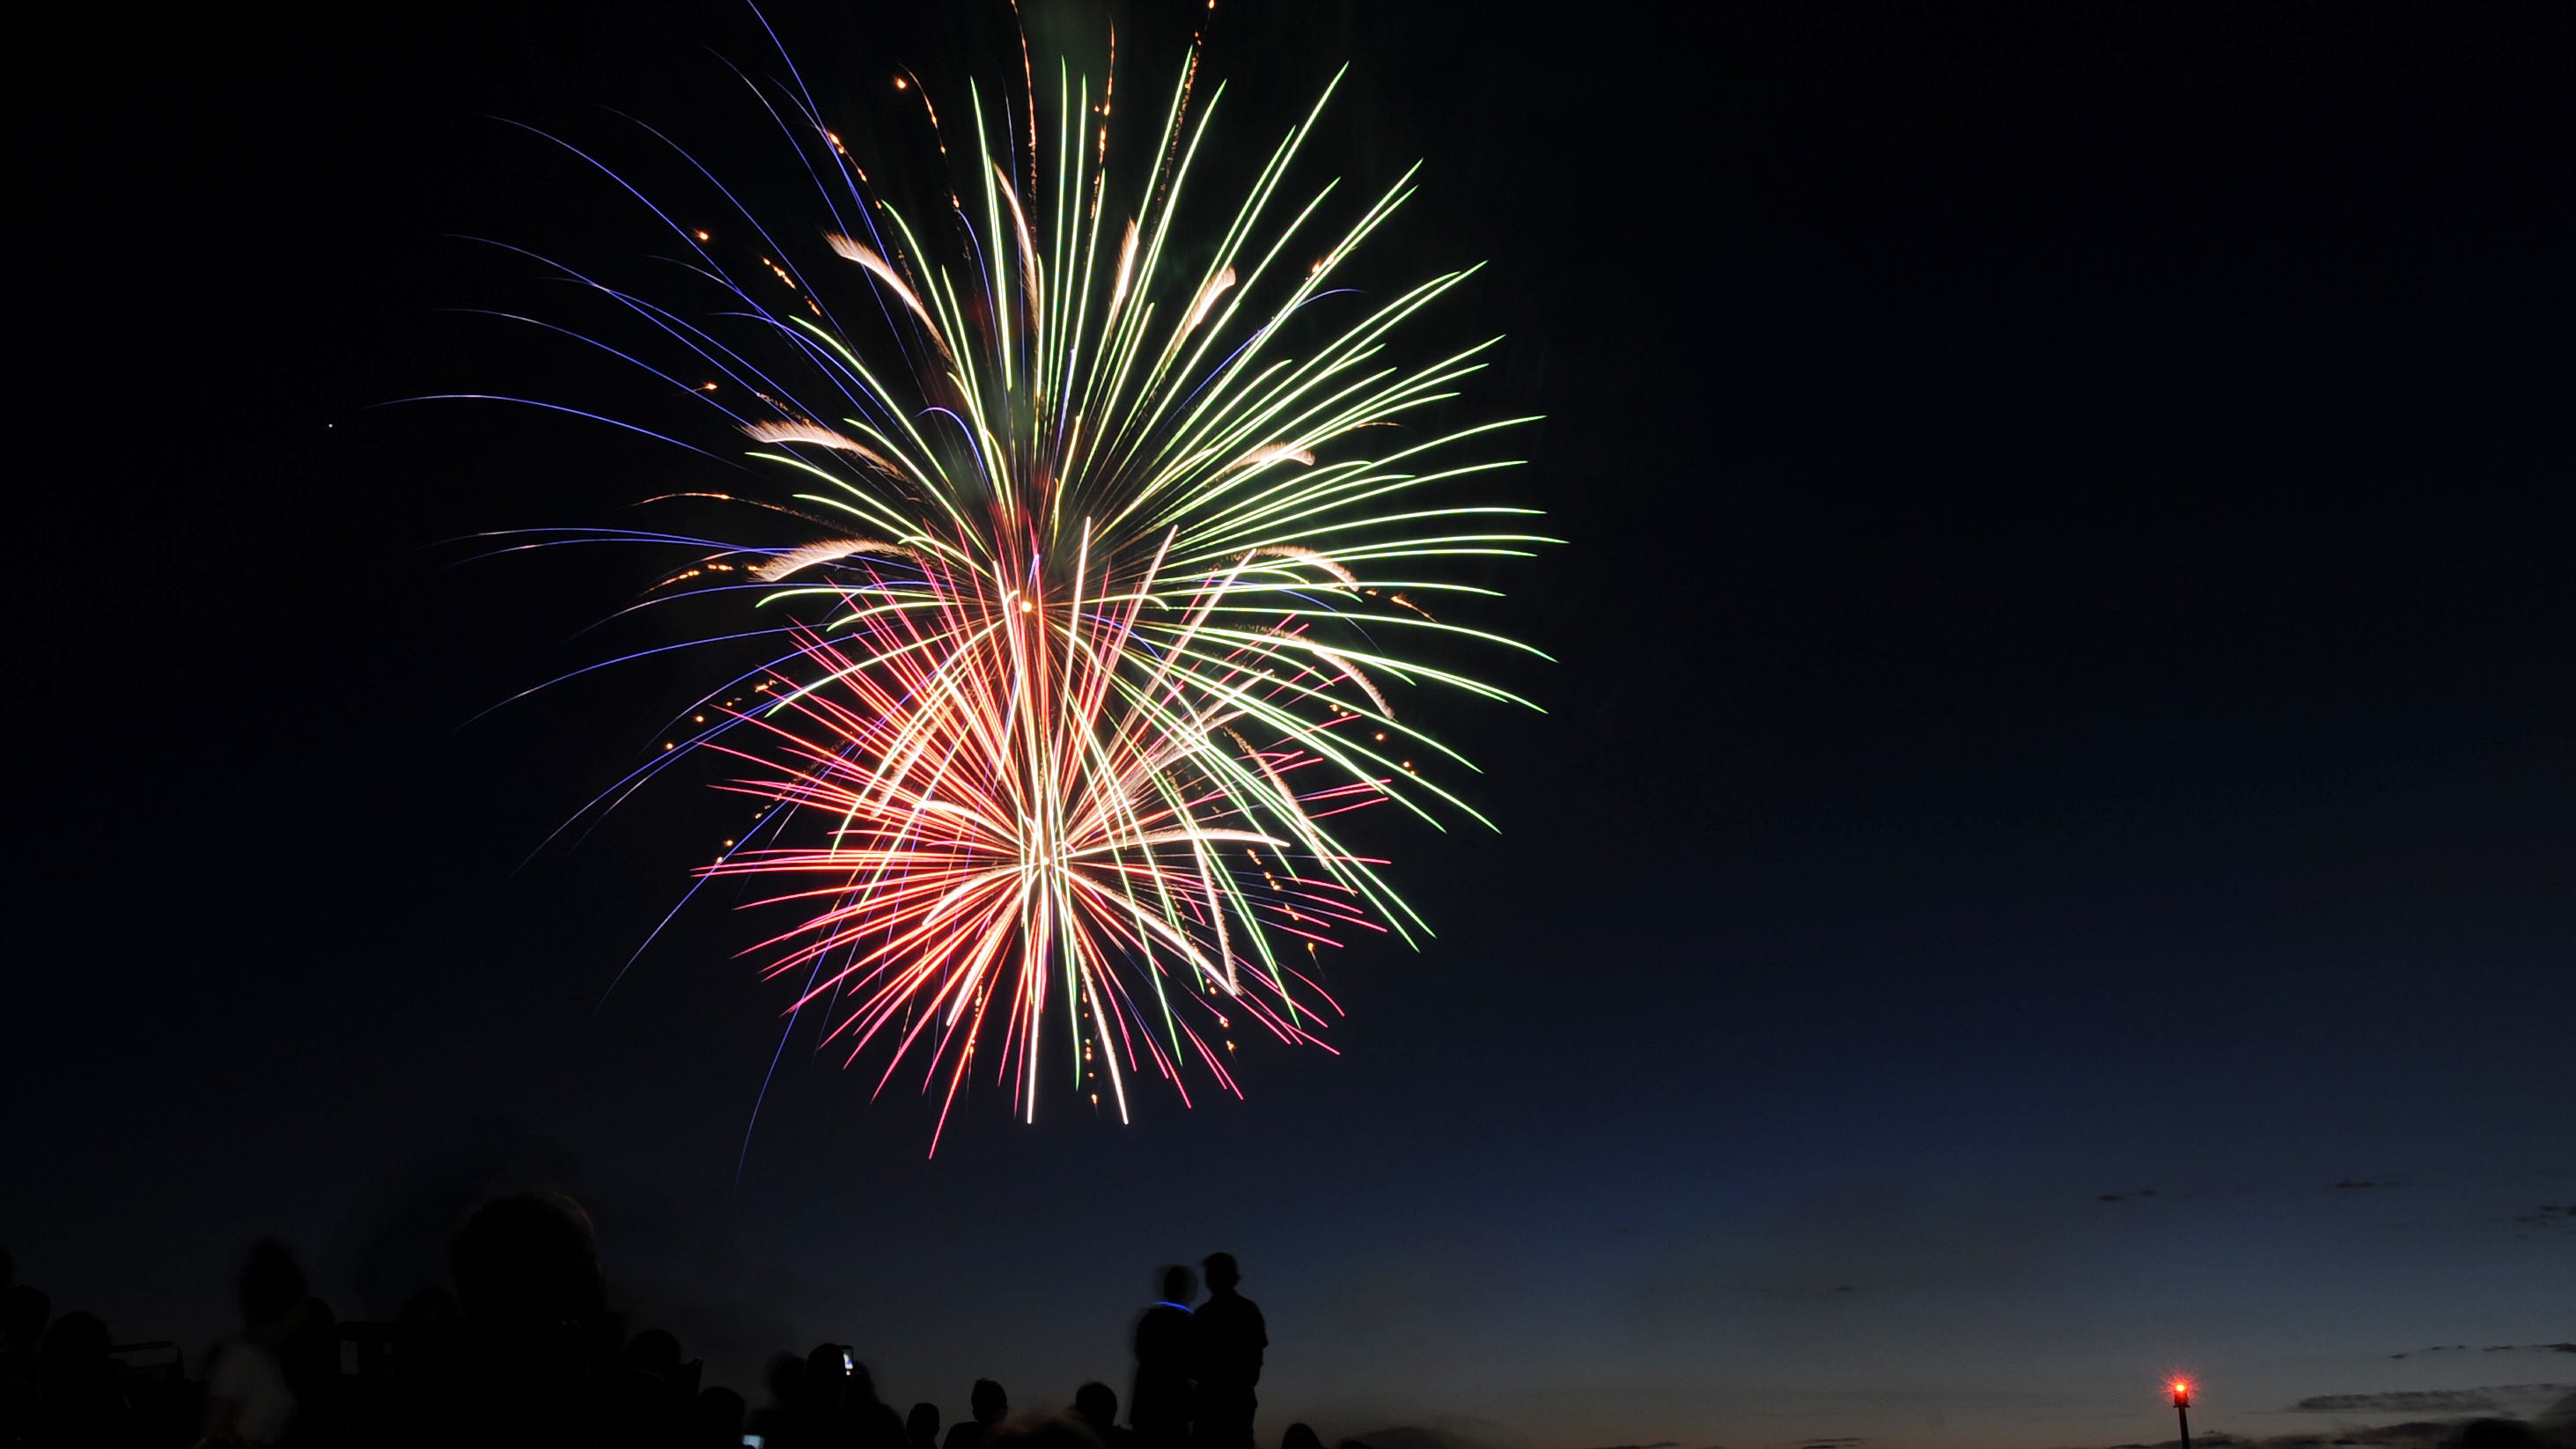 2022 Cape Cod fireworks 4th of July guide and best way to watch